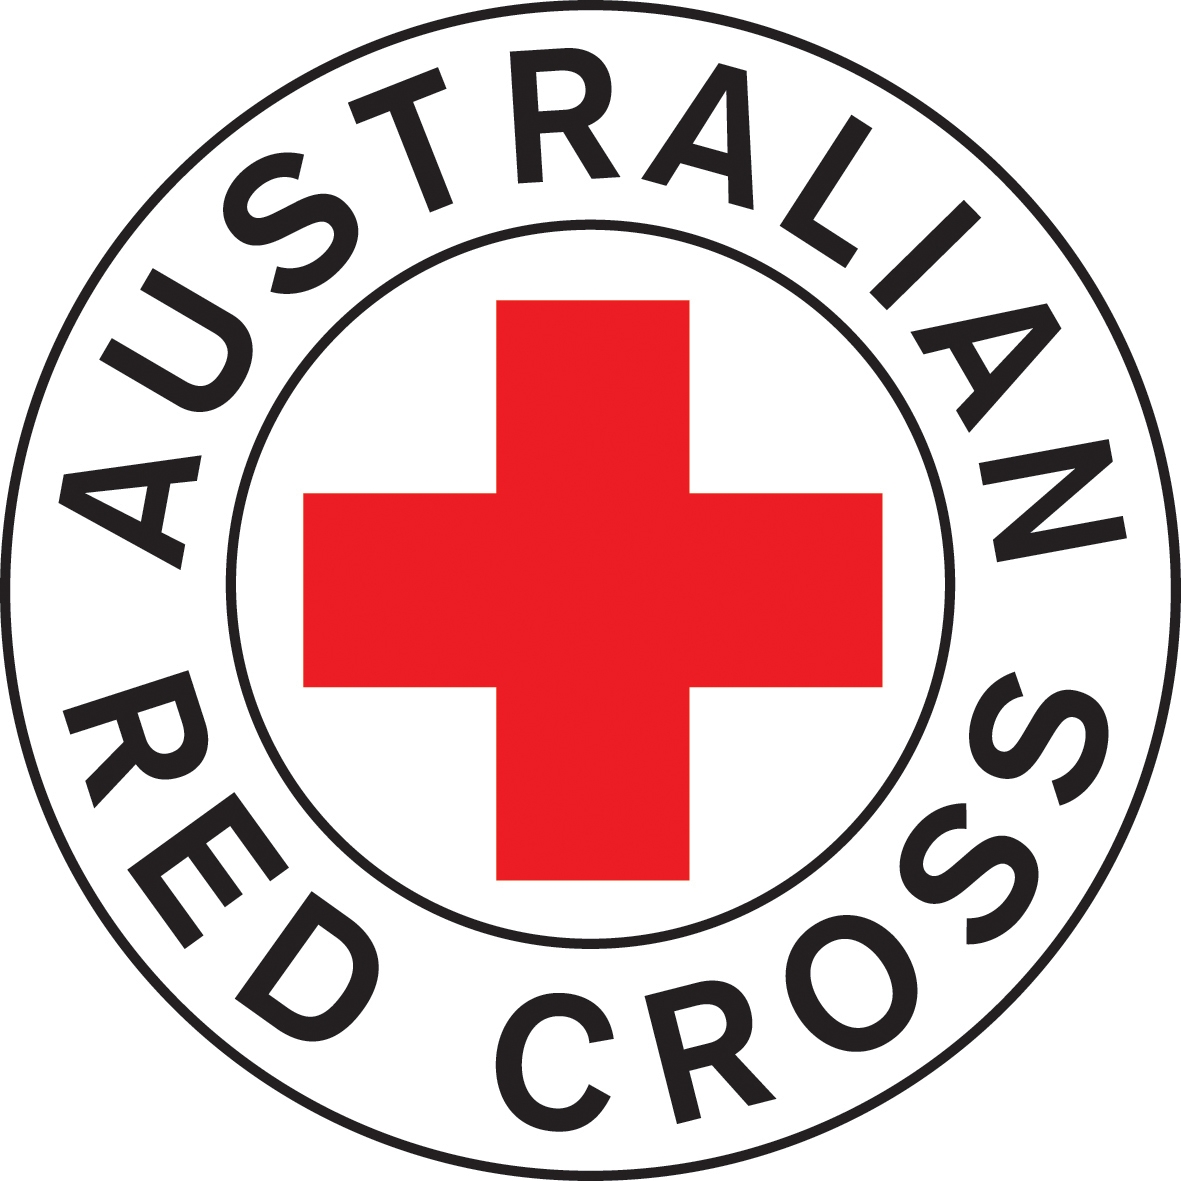 The Red Cross: Bibliography